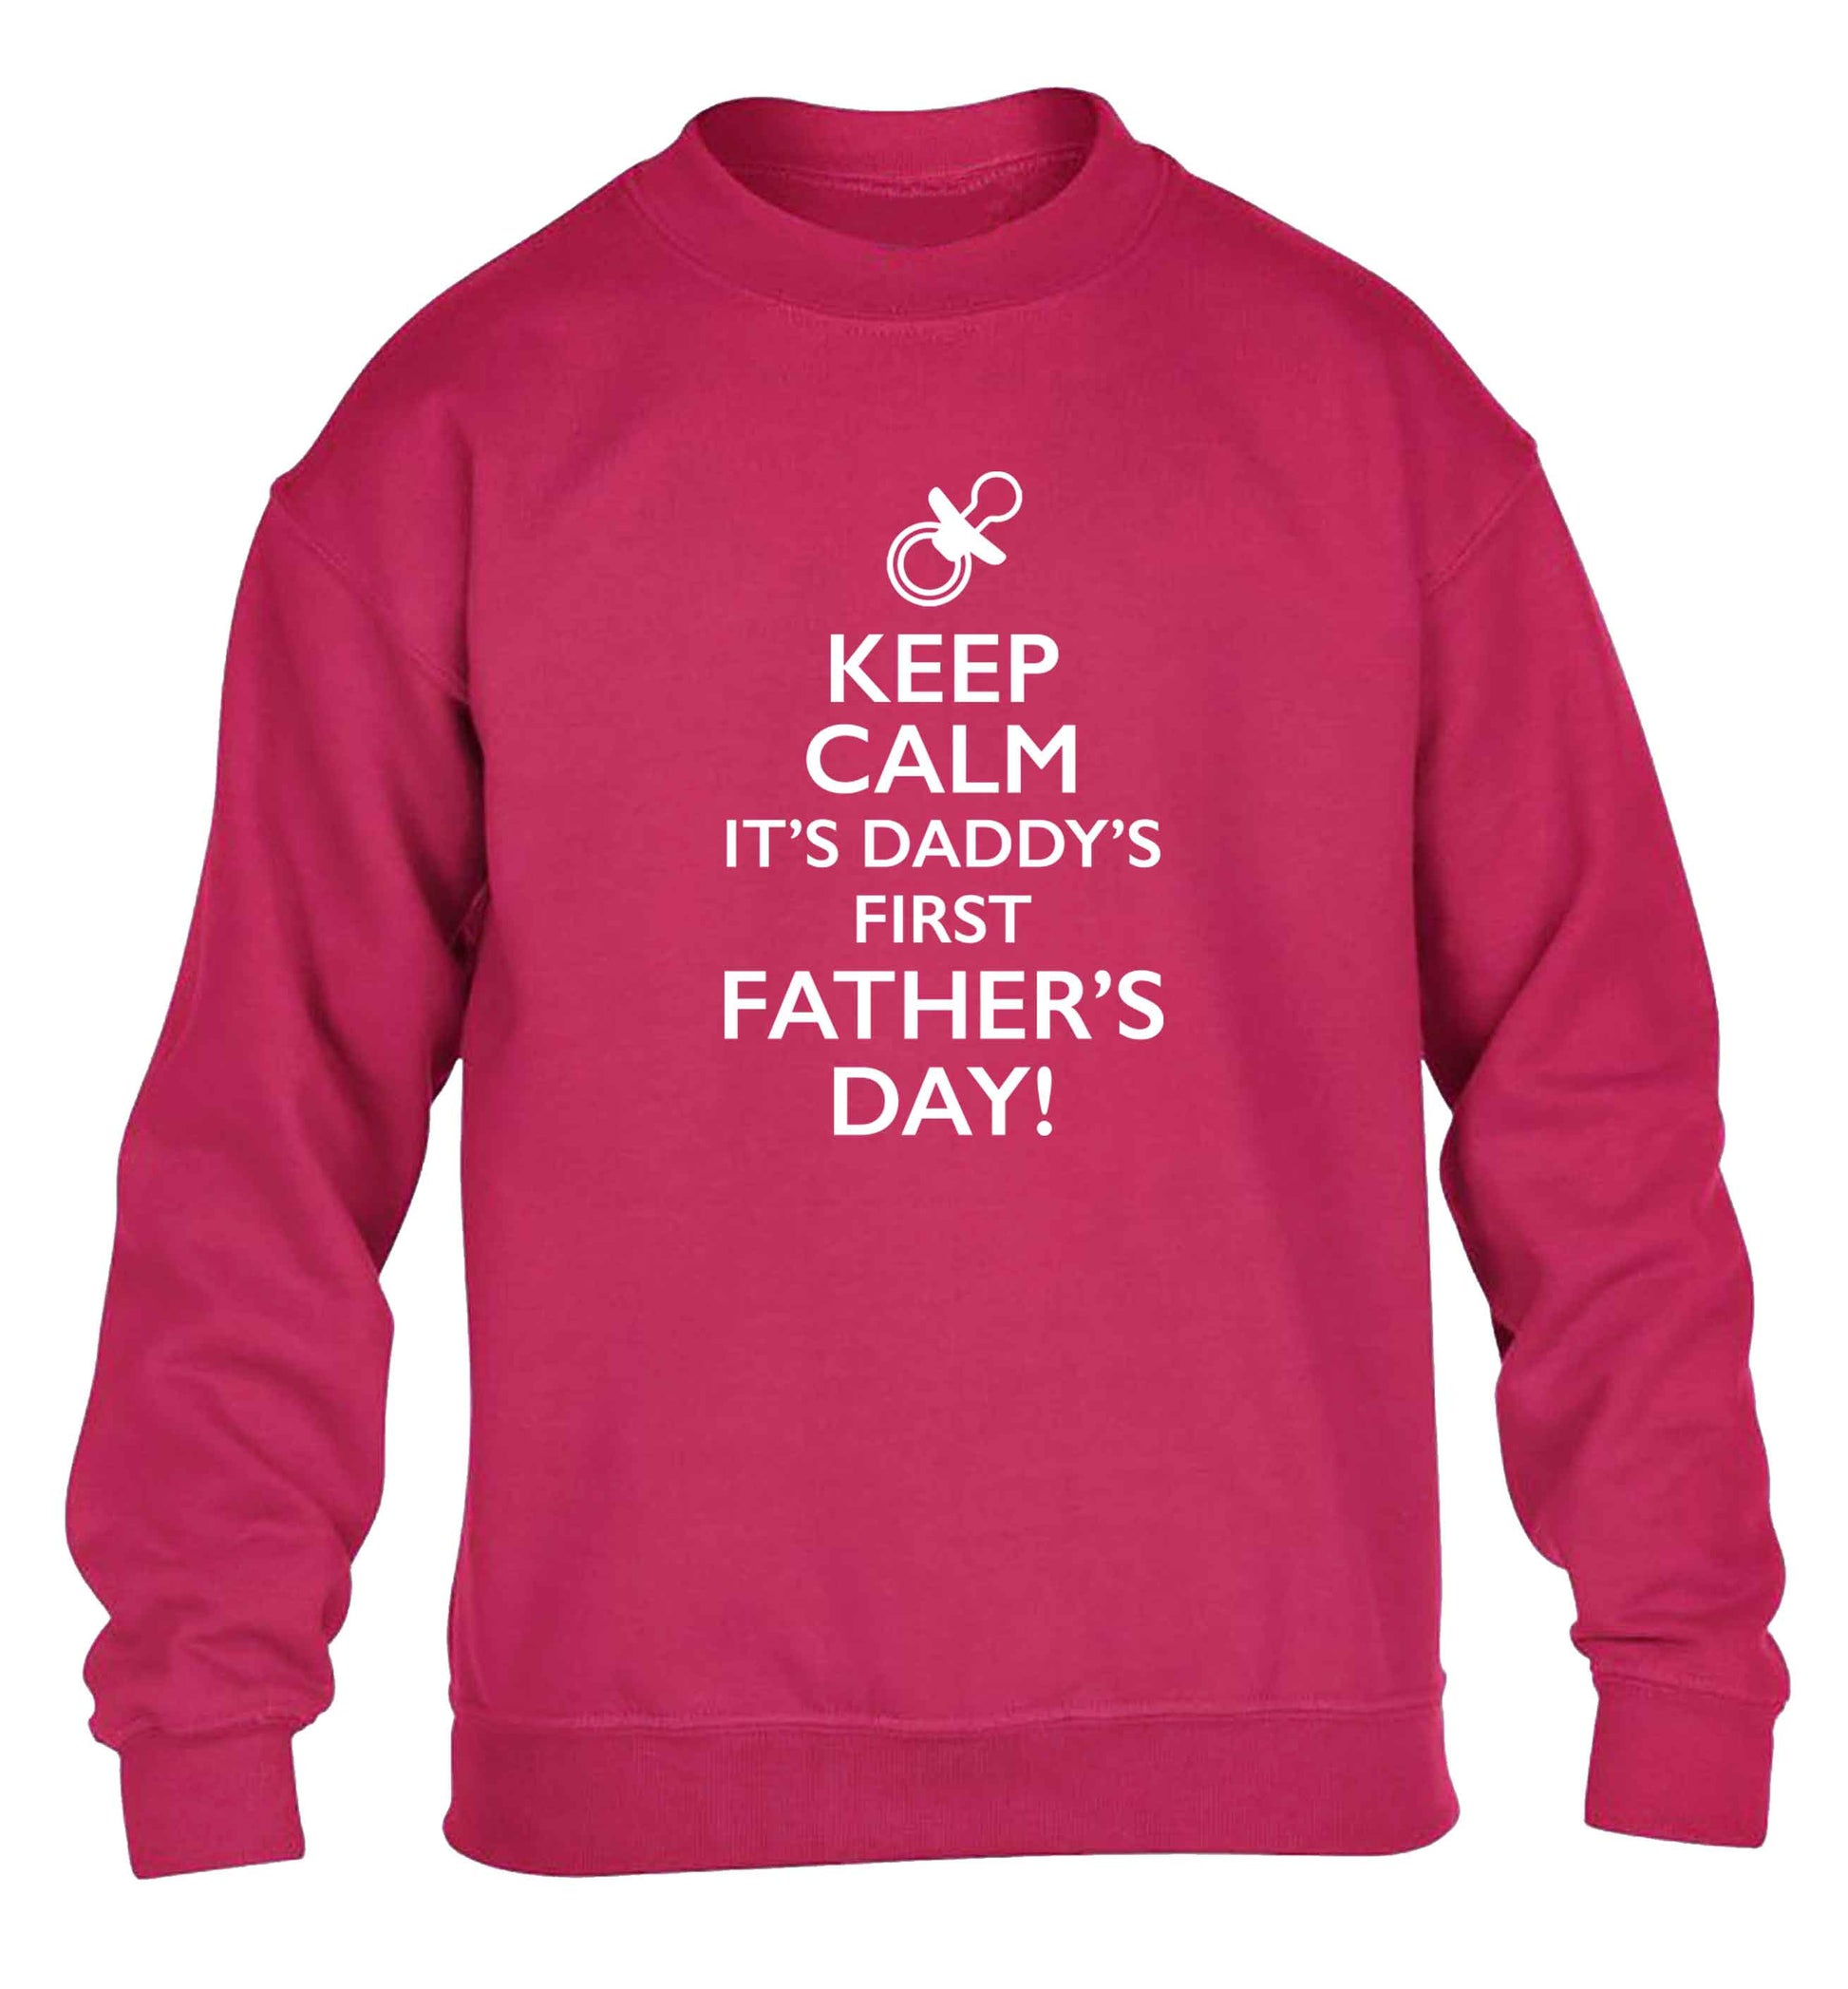 Keep calm it's daddys first father's day children's pink sweater 12-13 Years